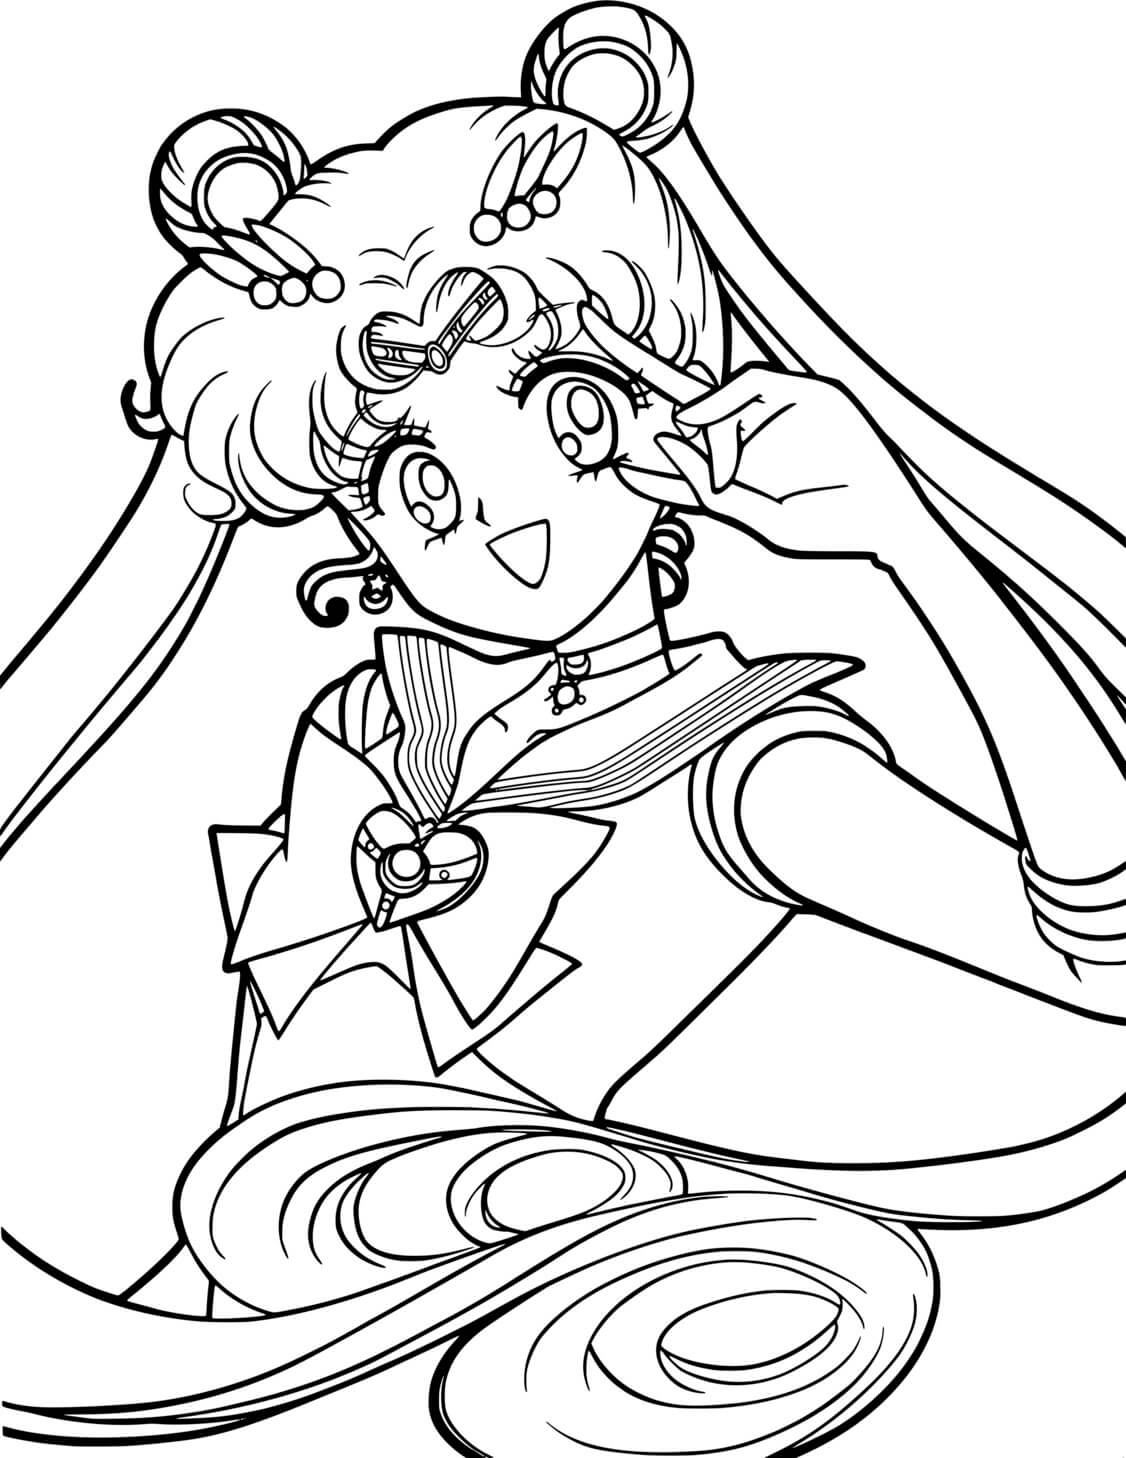 Anime Sailor Moon Manga Coloring Pages   Coloring Cool